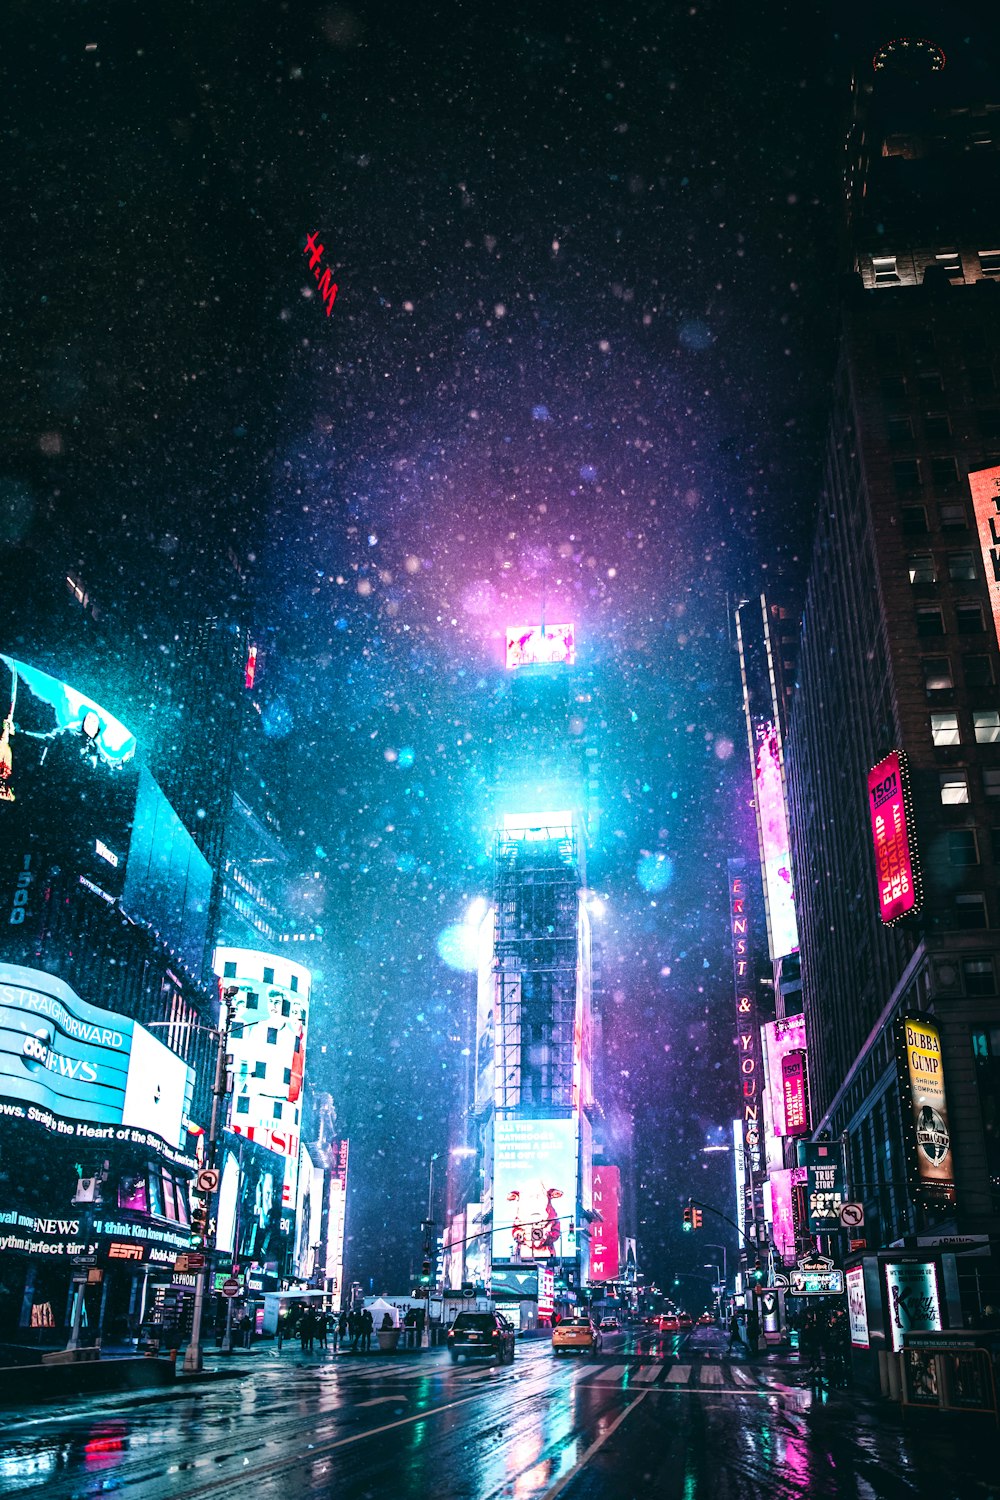 Dark City Pictures Hd Download Free Images On Unsplash